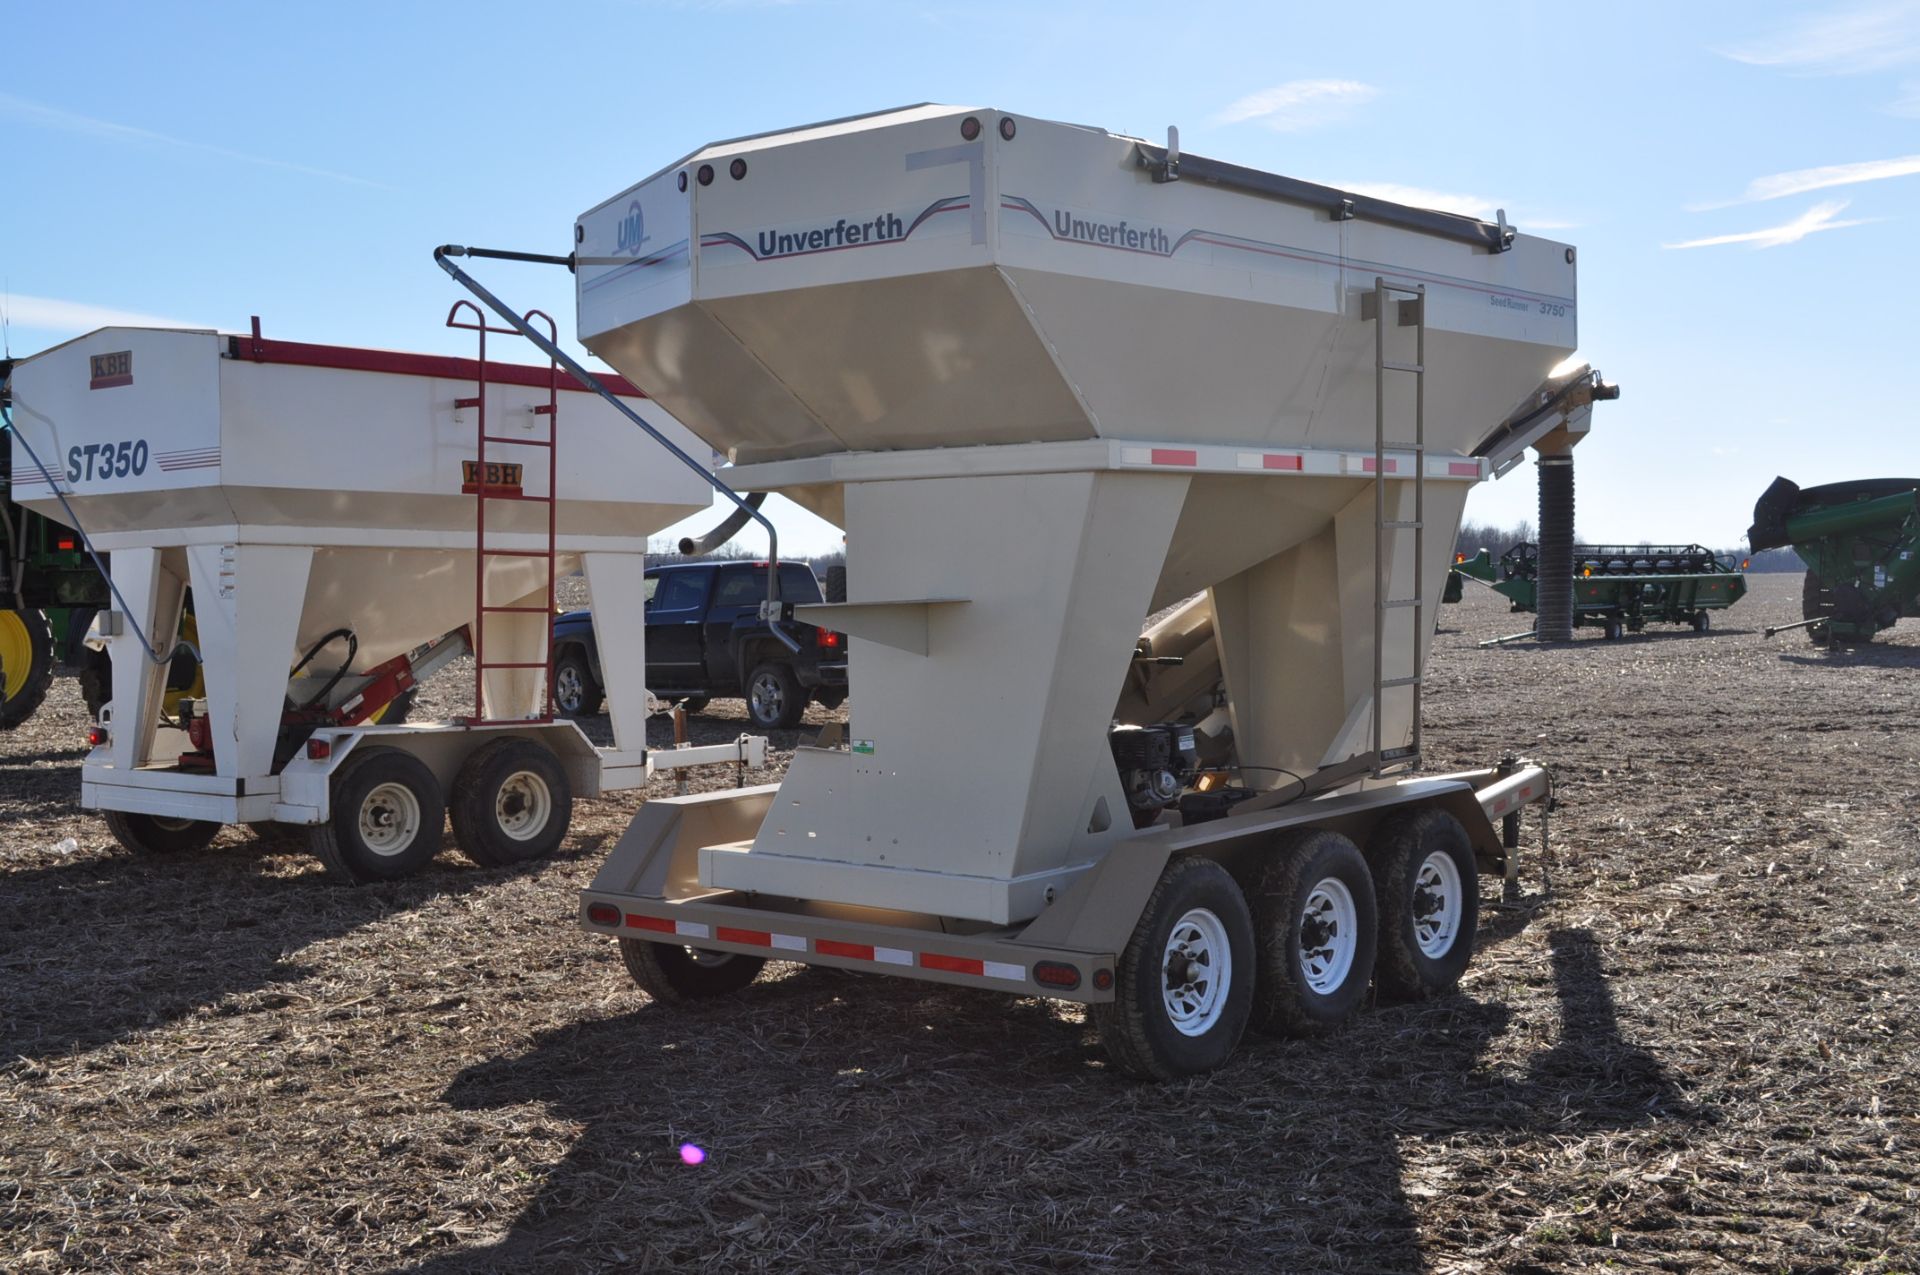 3750 Unverferth Seed Runner Seed Tender, tri-axle, 2 5/16 ball hitch, 18 ft seed conveyor, Honda - Image 3 of 19